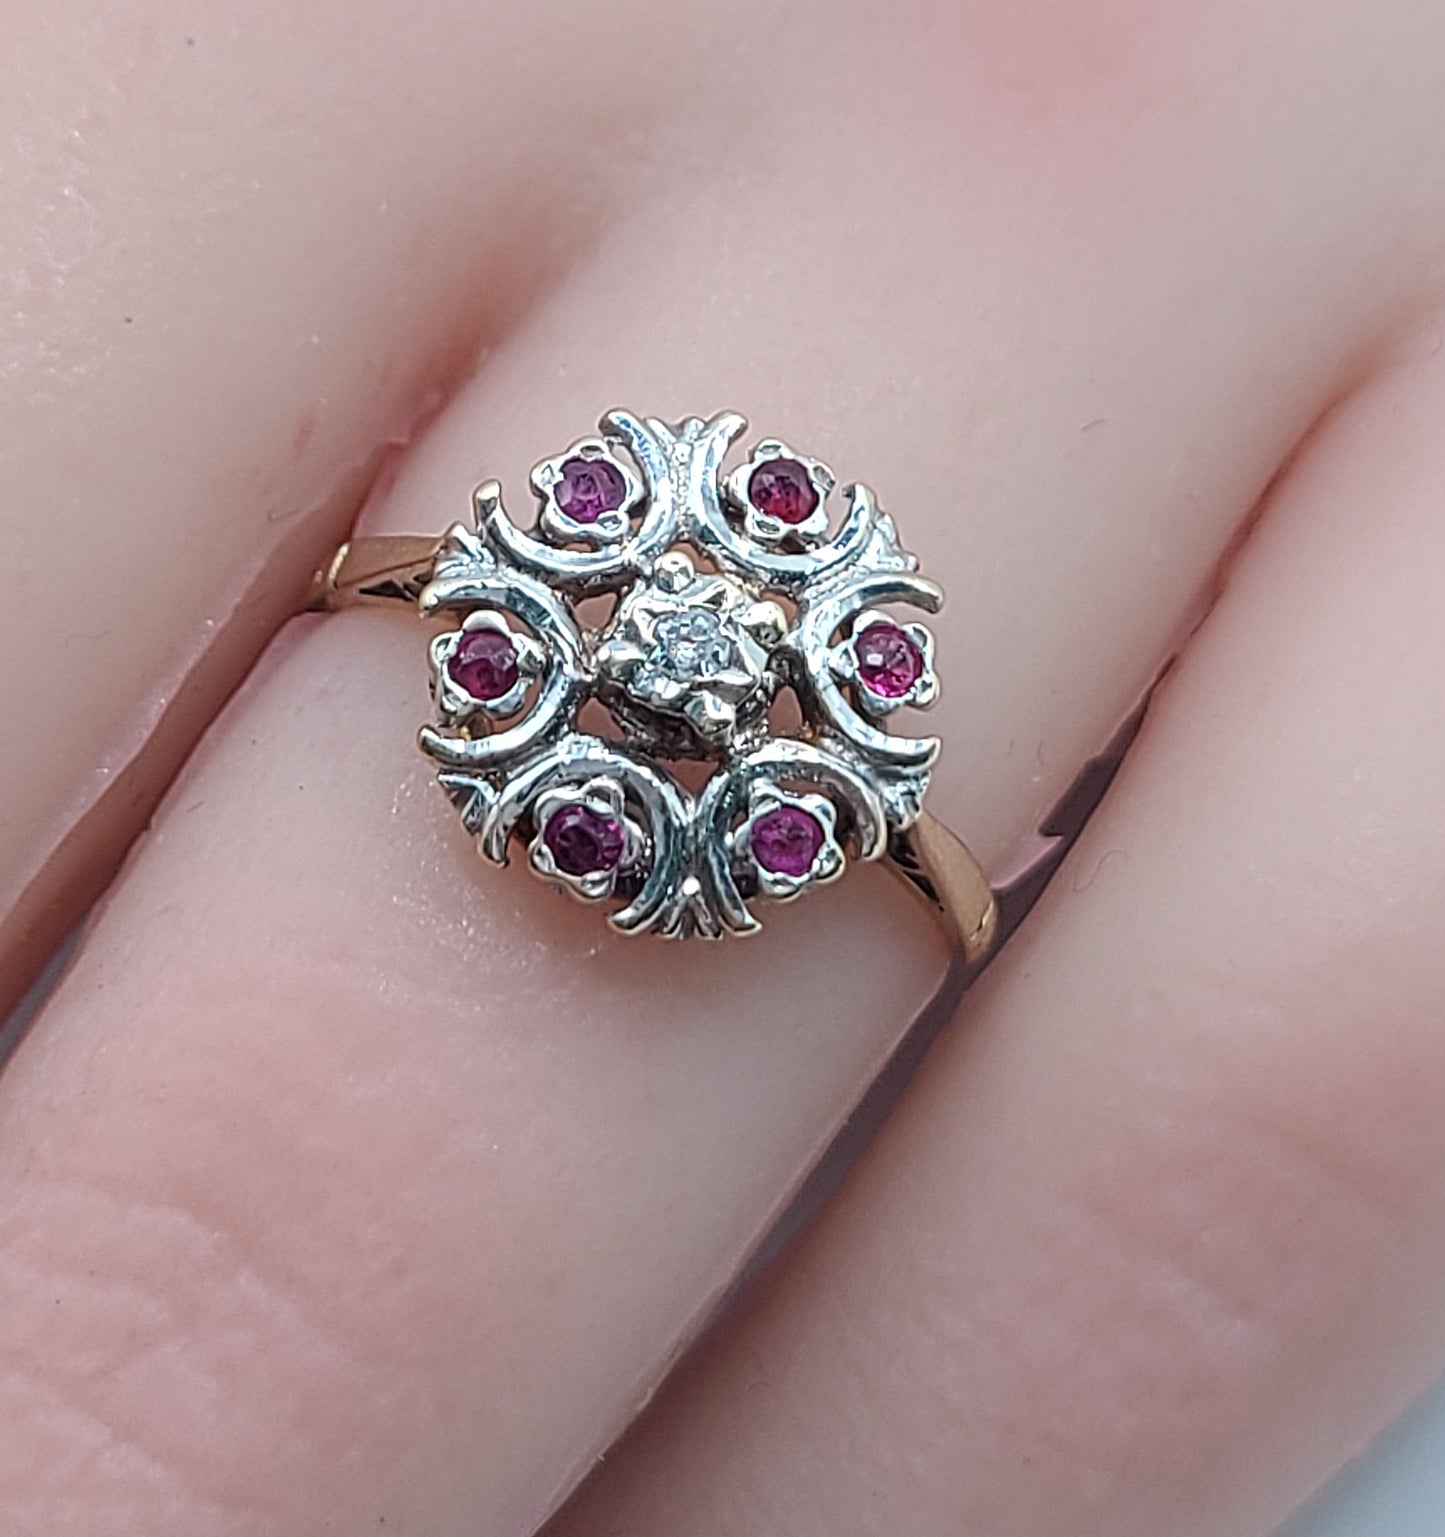 Vintage Art Deco Style Ruby & Diamond Cluster Ring 9ct Gold Band